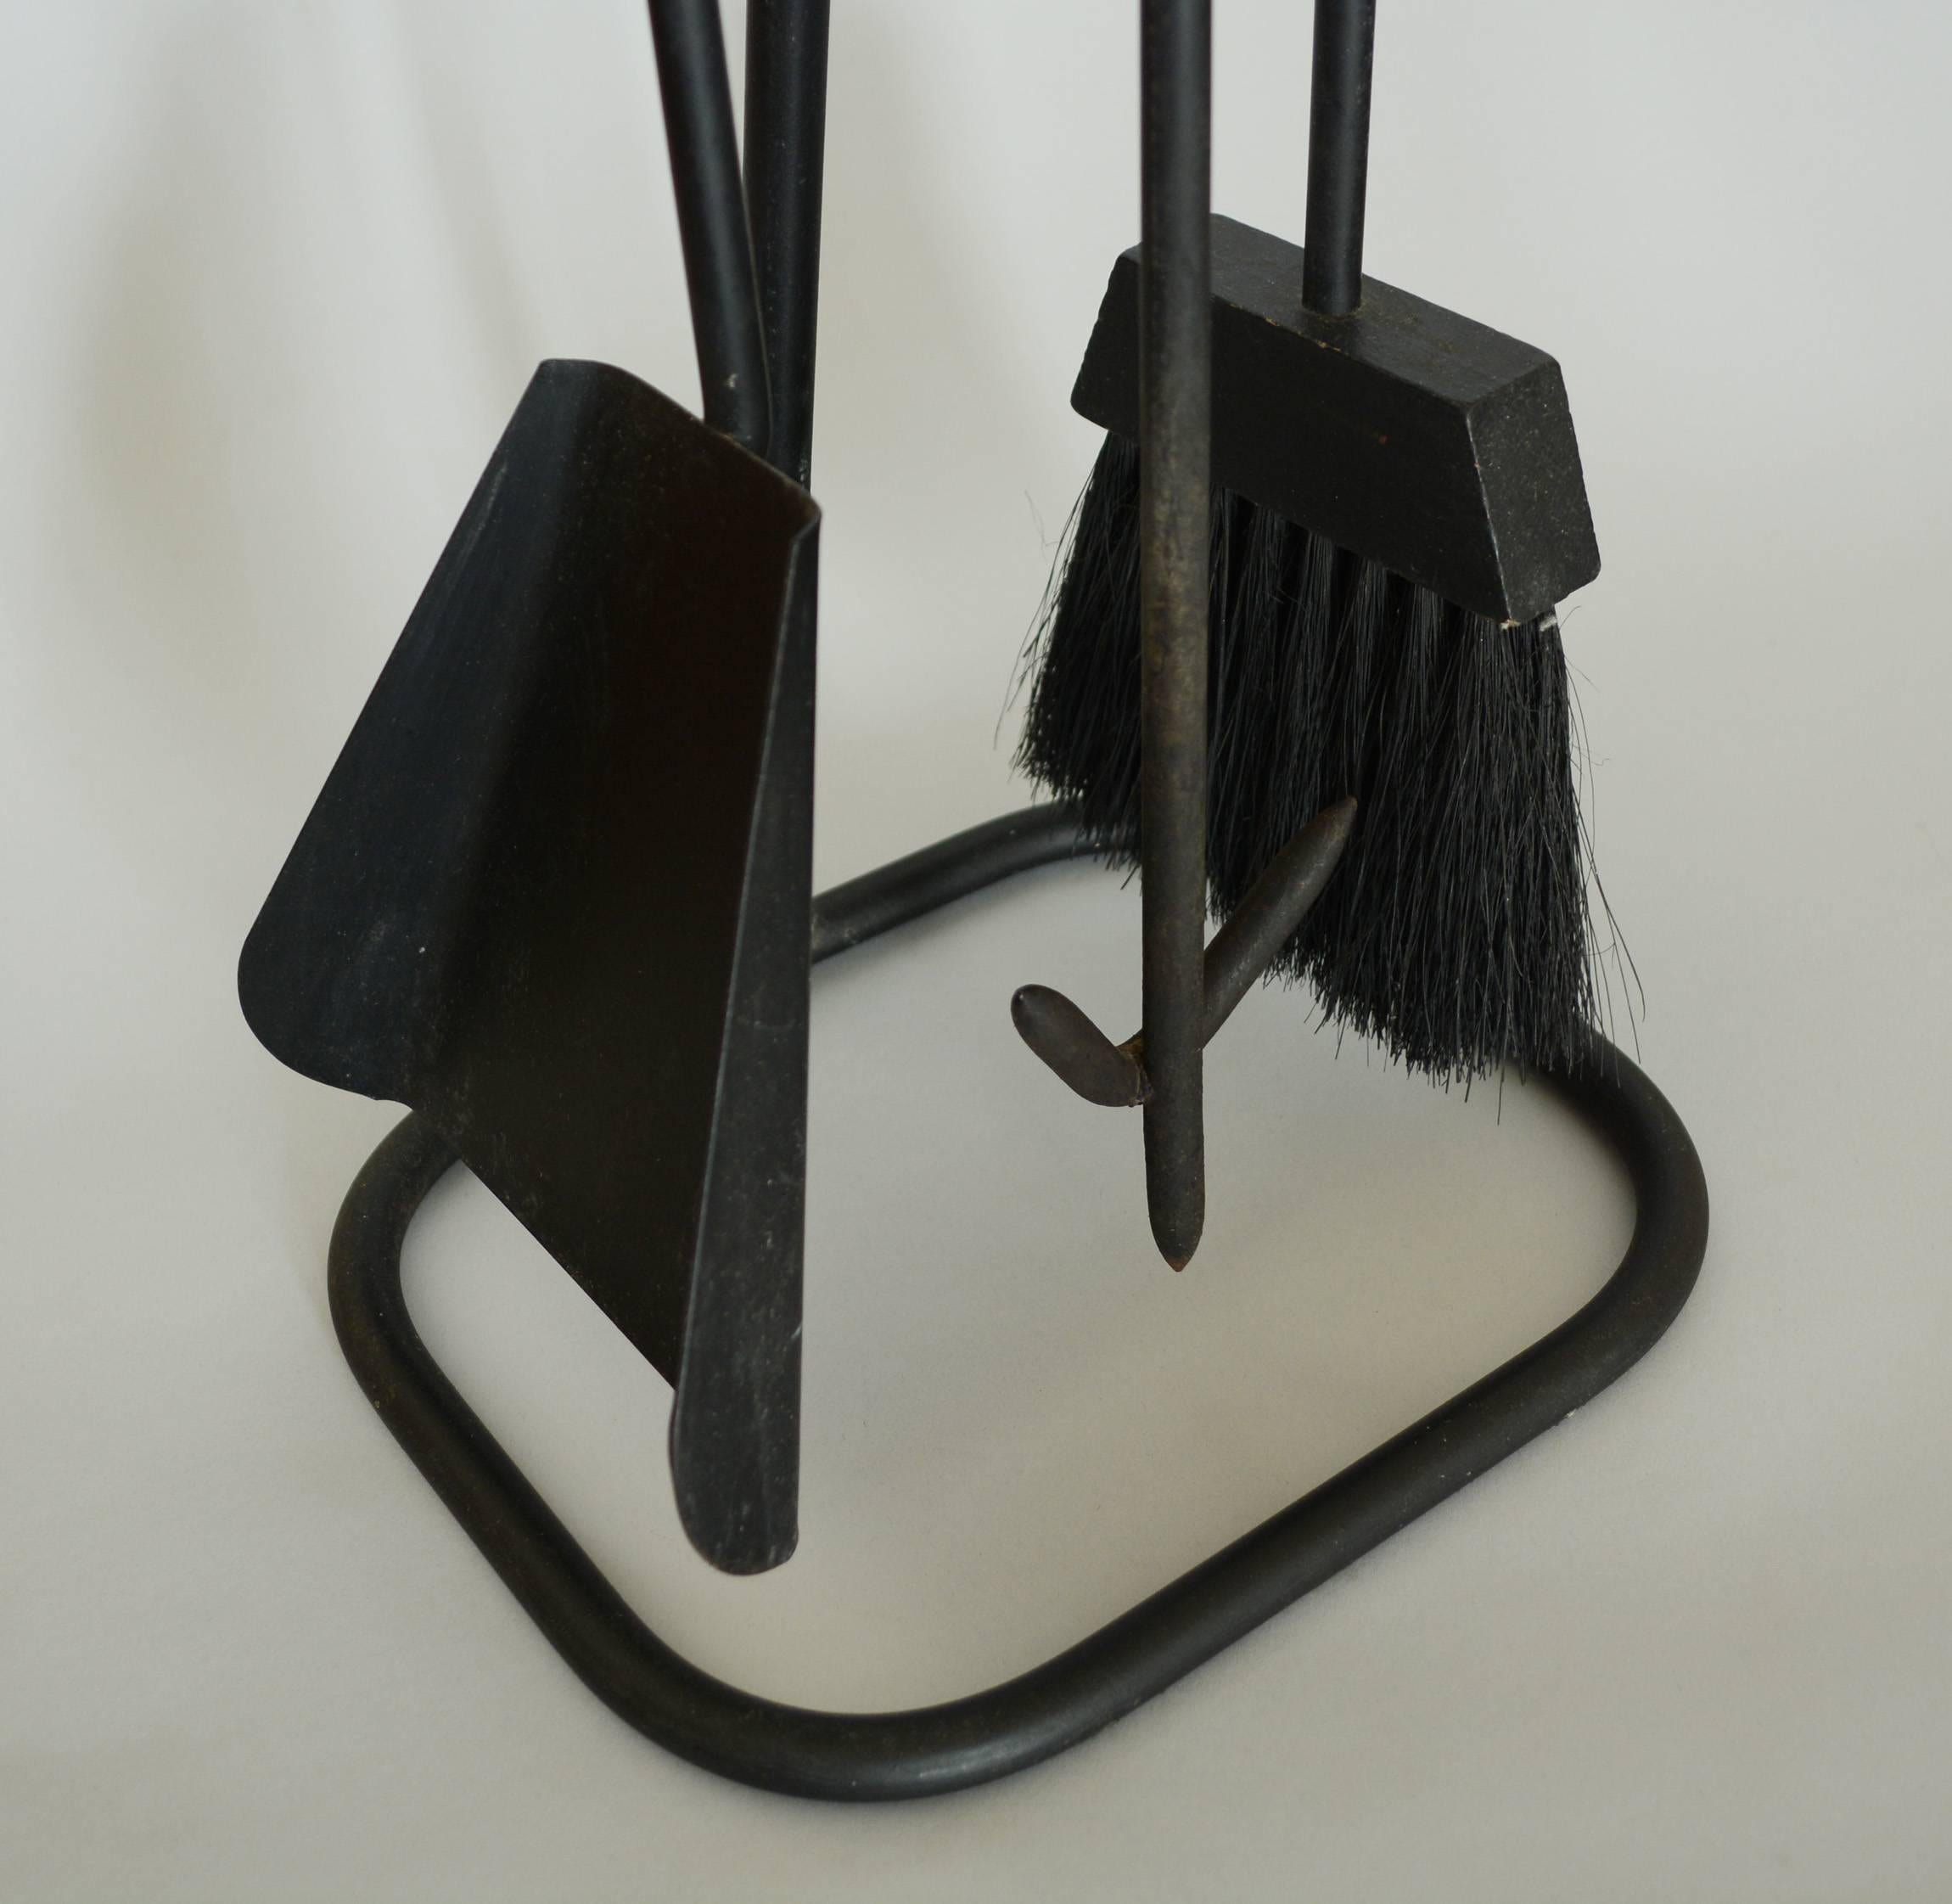 American Modernist Iron Fireplace Tools